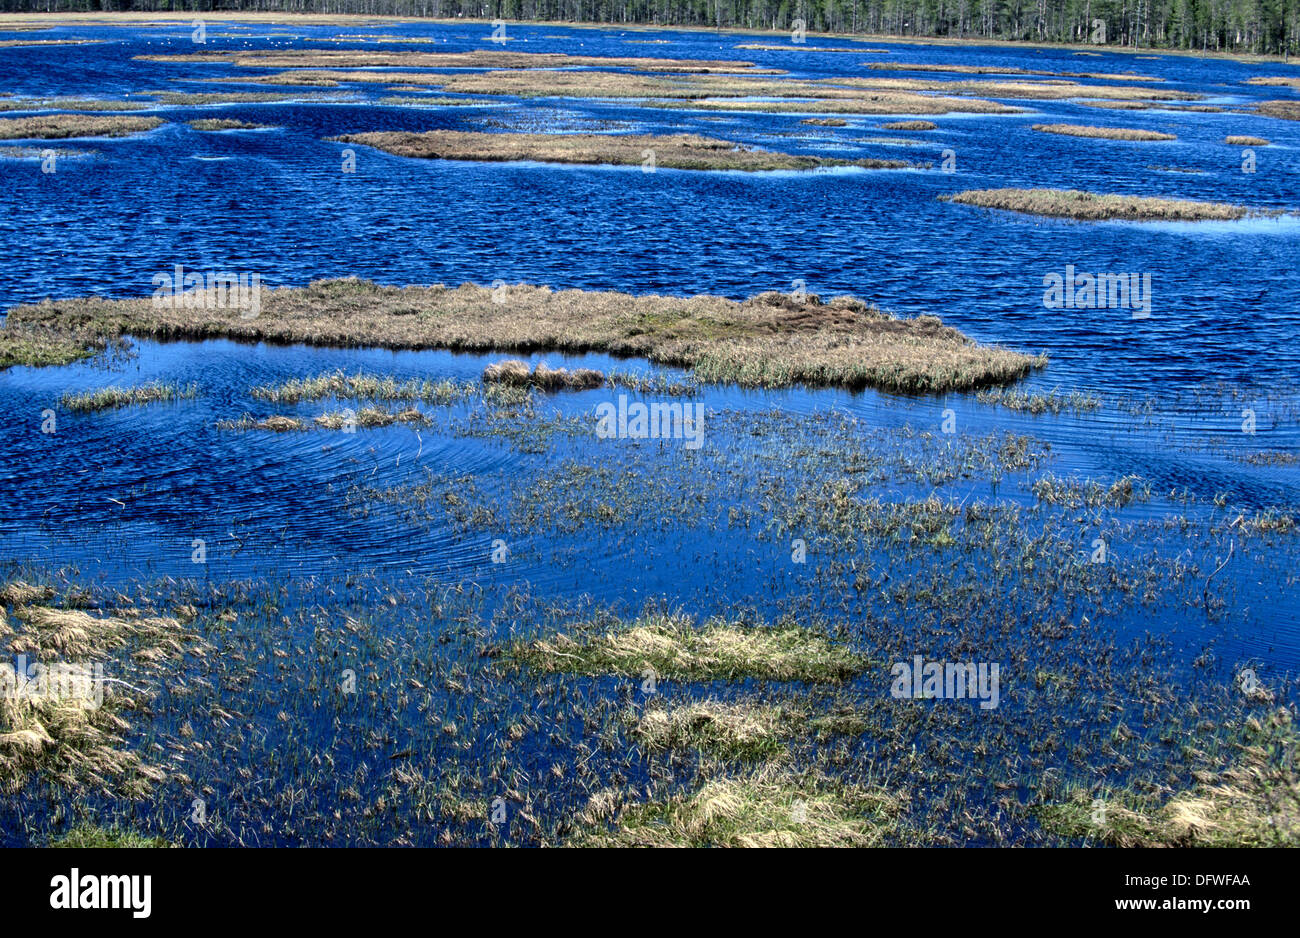 Swamp. Marshland with open water area and islands. Spring near Suomussalmi. Finland. Stock Photo